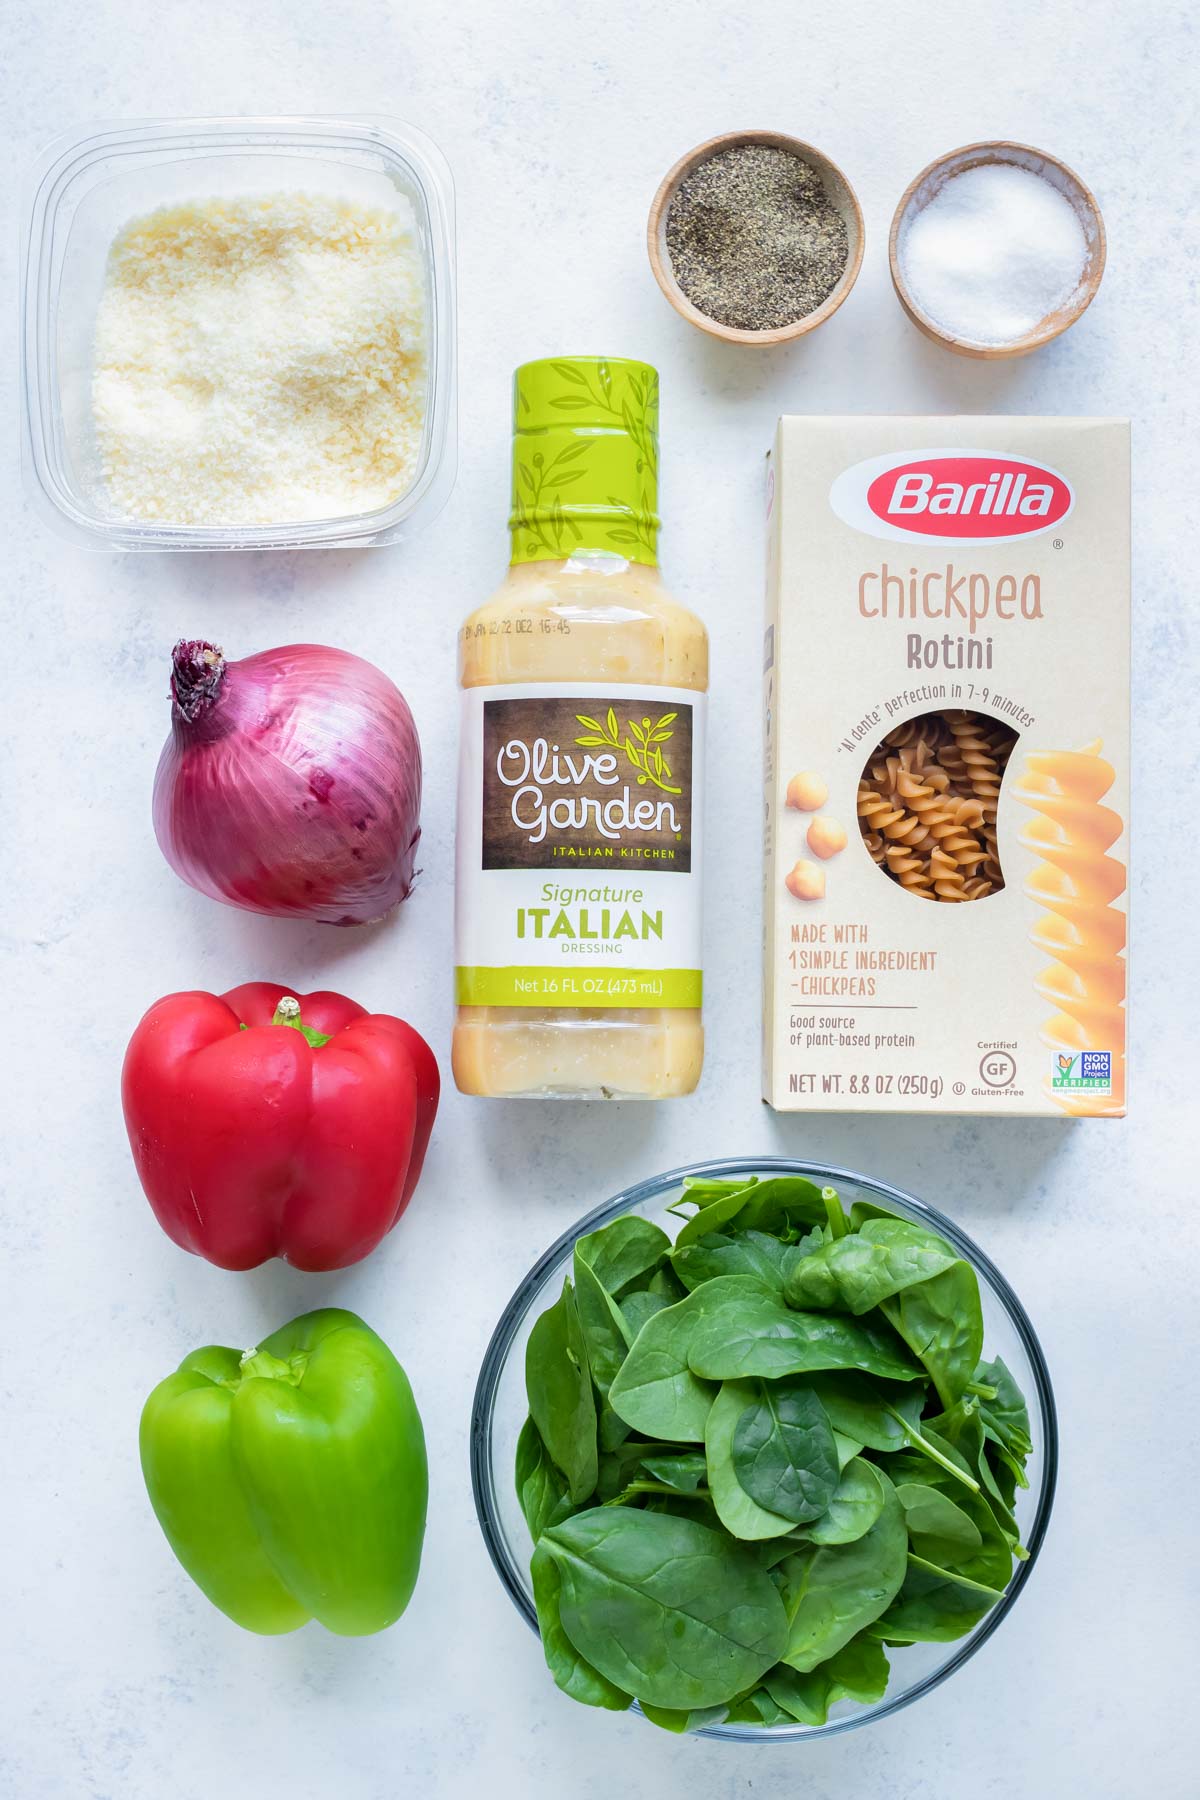 Pasta, onions, peppers, spinach, italian dressing, and Parmesan cheese are the ingredients for this recipe.